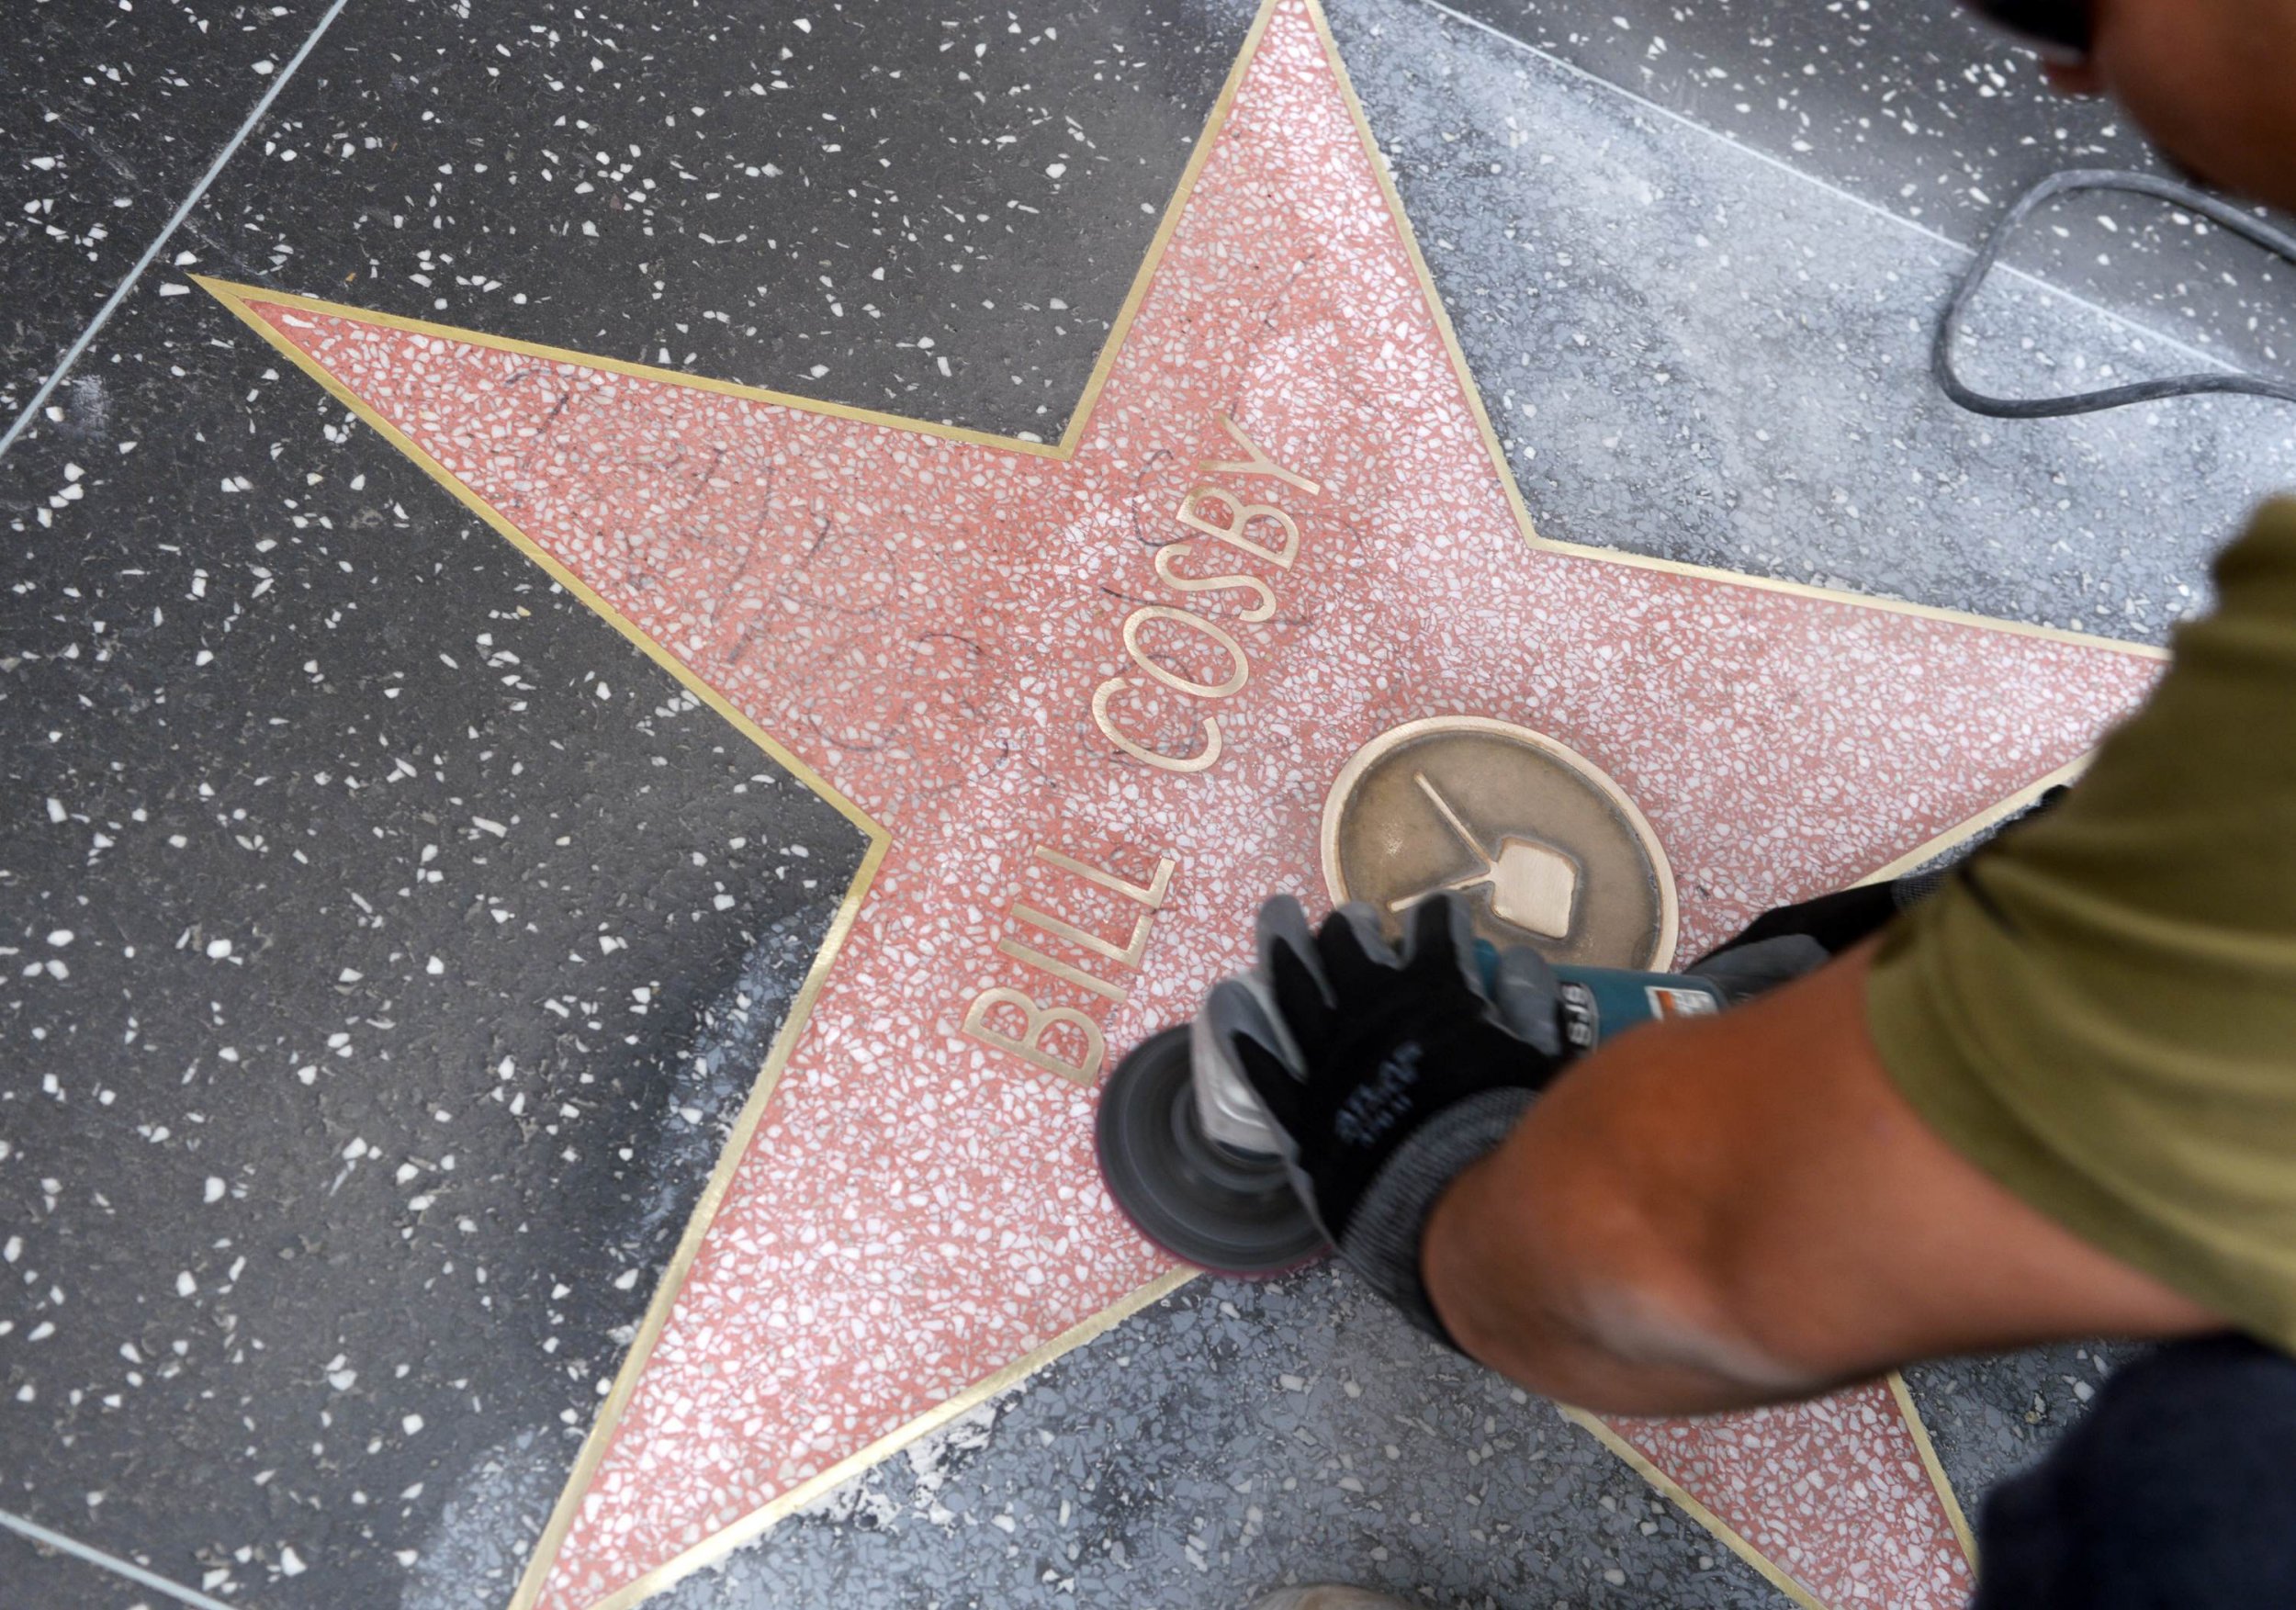 bill cosby's walk of fame star vandalized